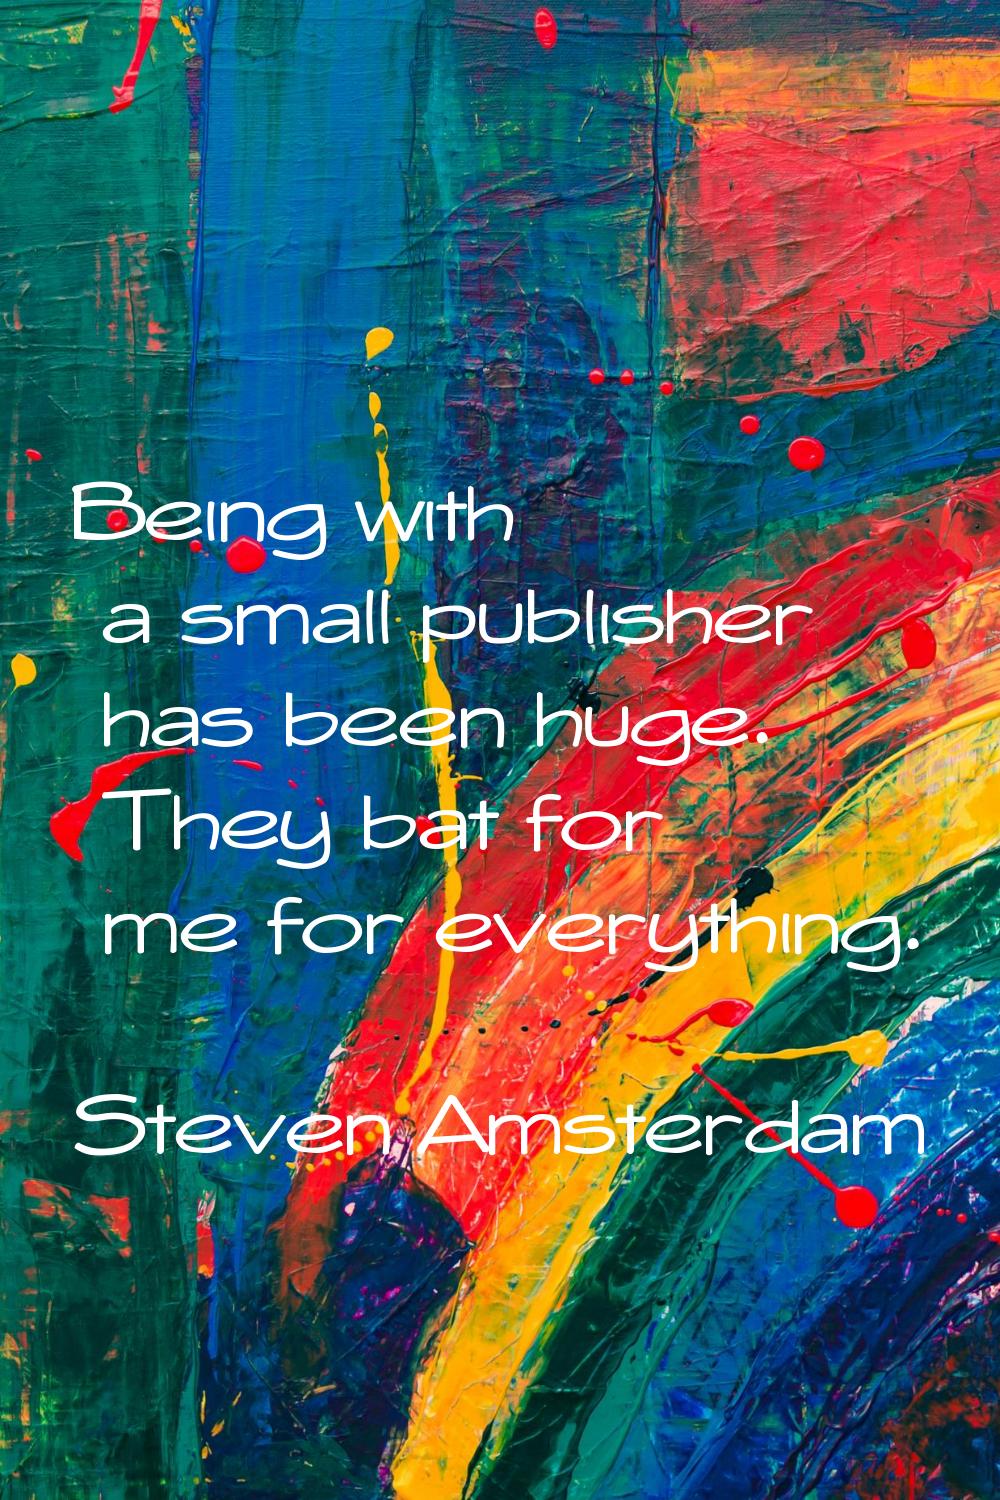 Being with a small publisher has been huge. They bat for me for everything.